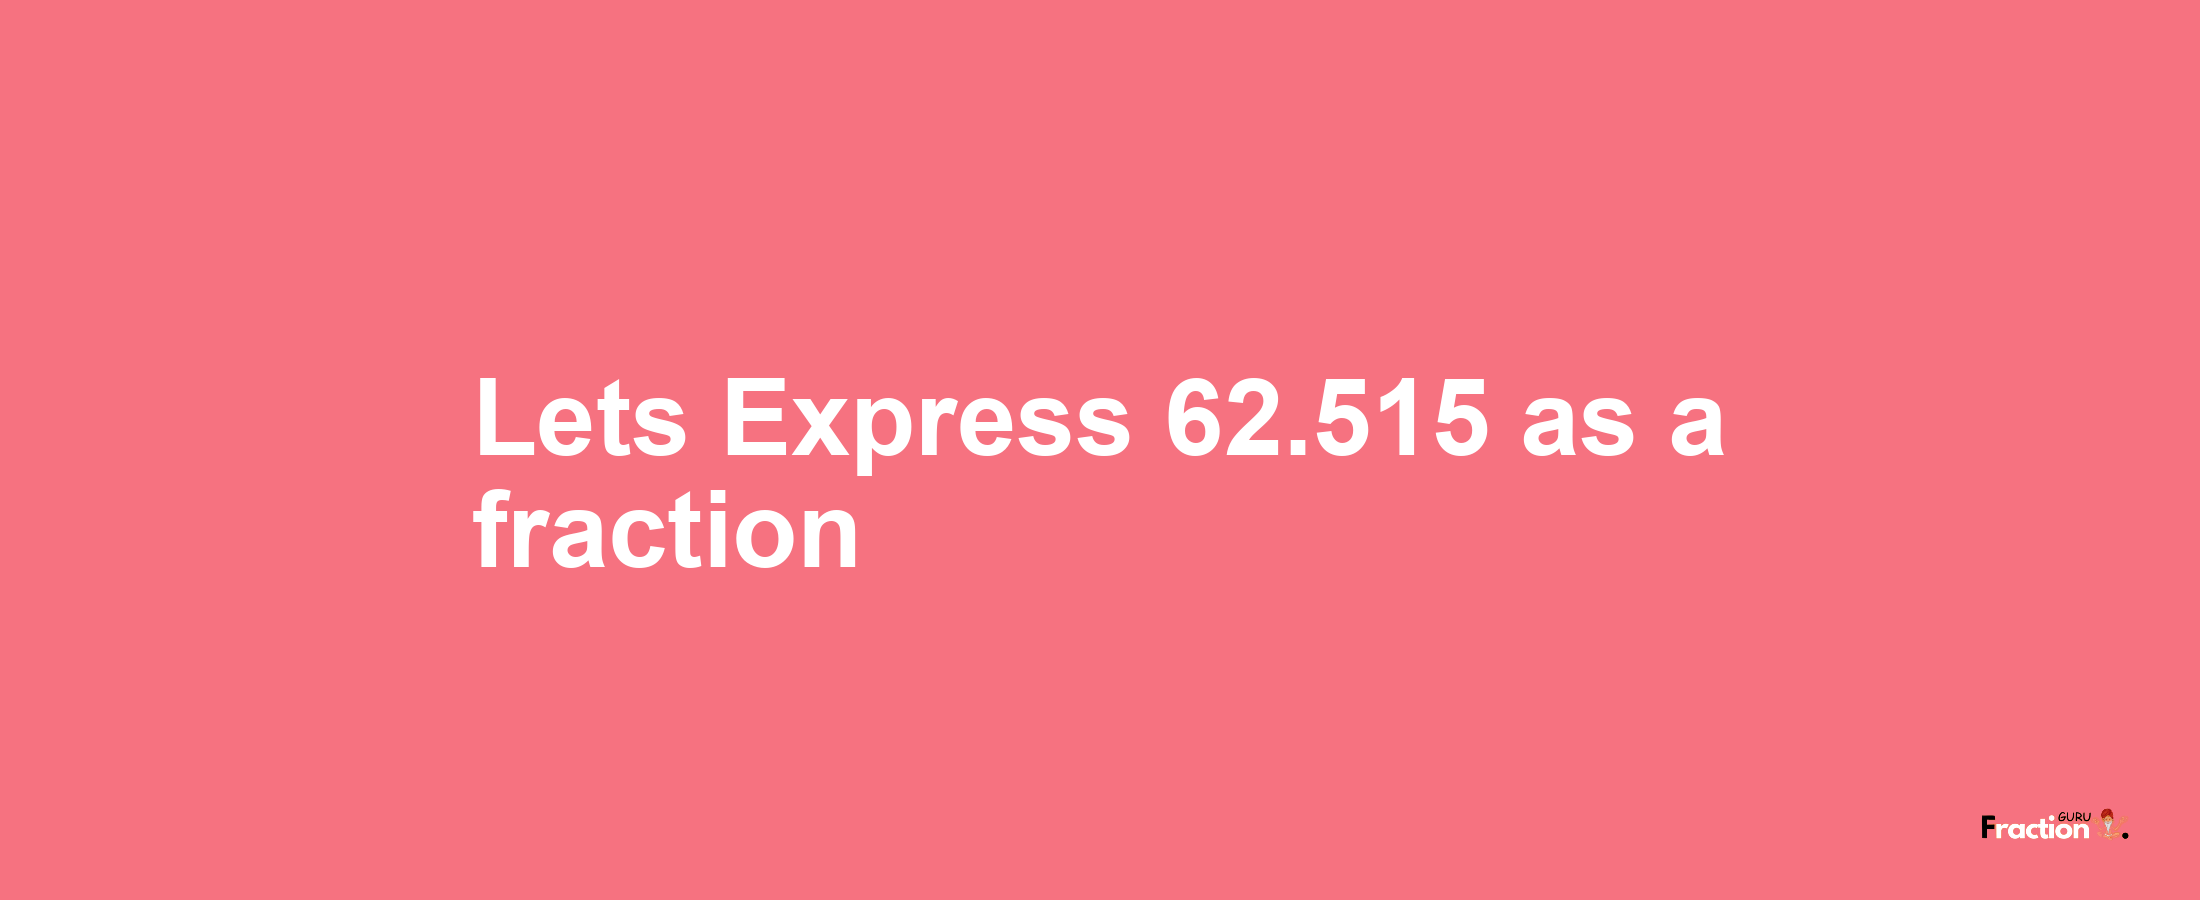 Lets Express 62.515 as afraction